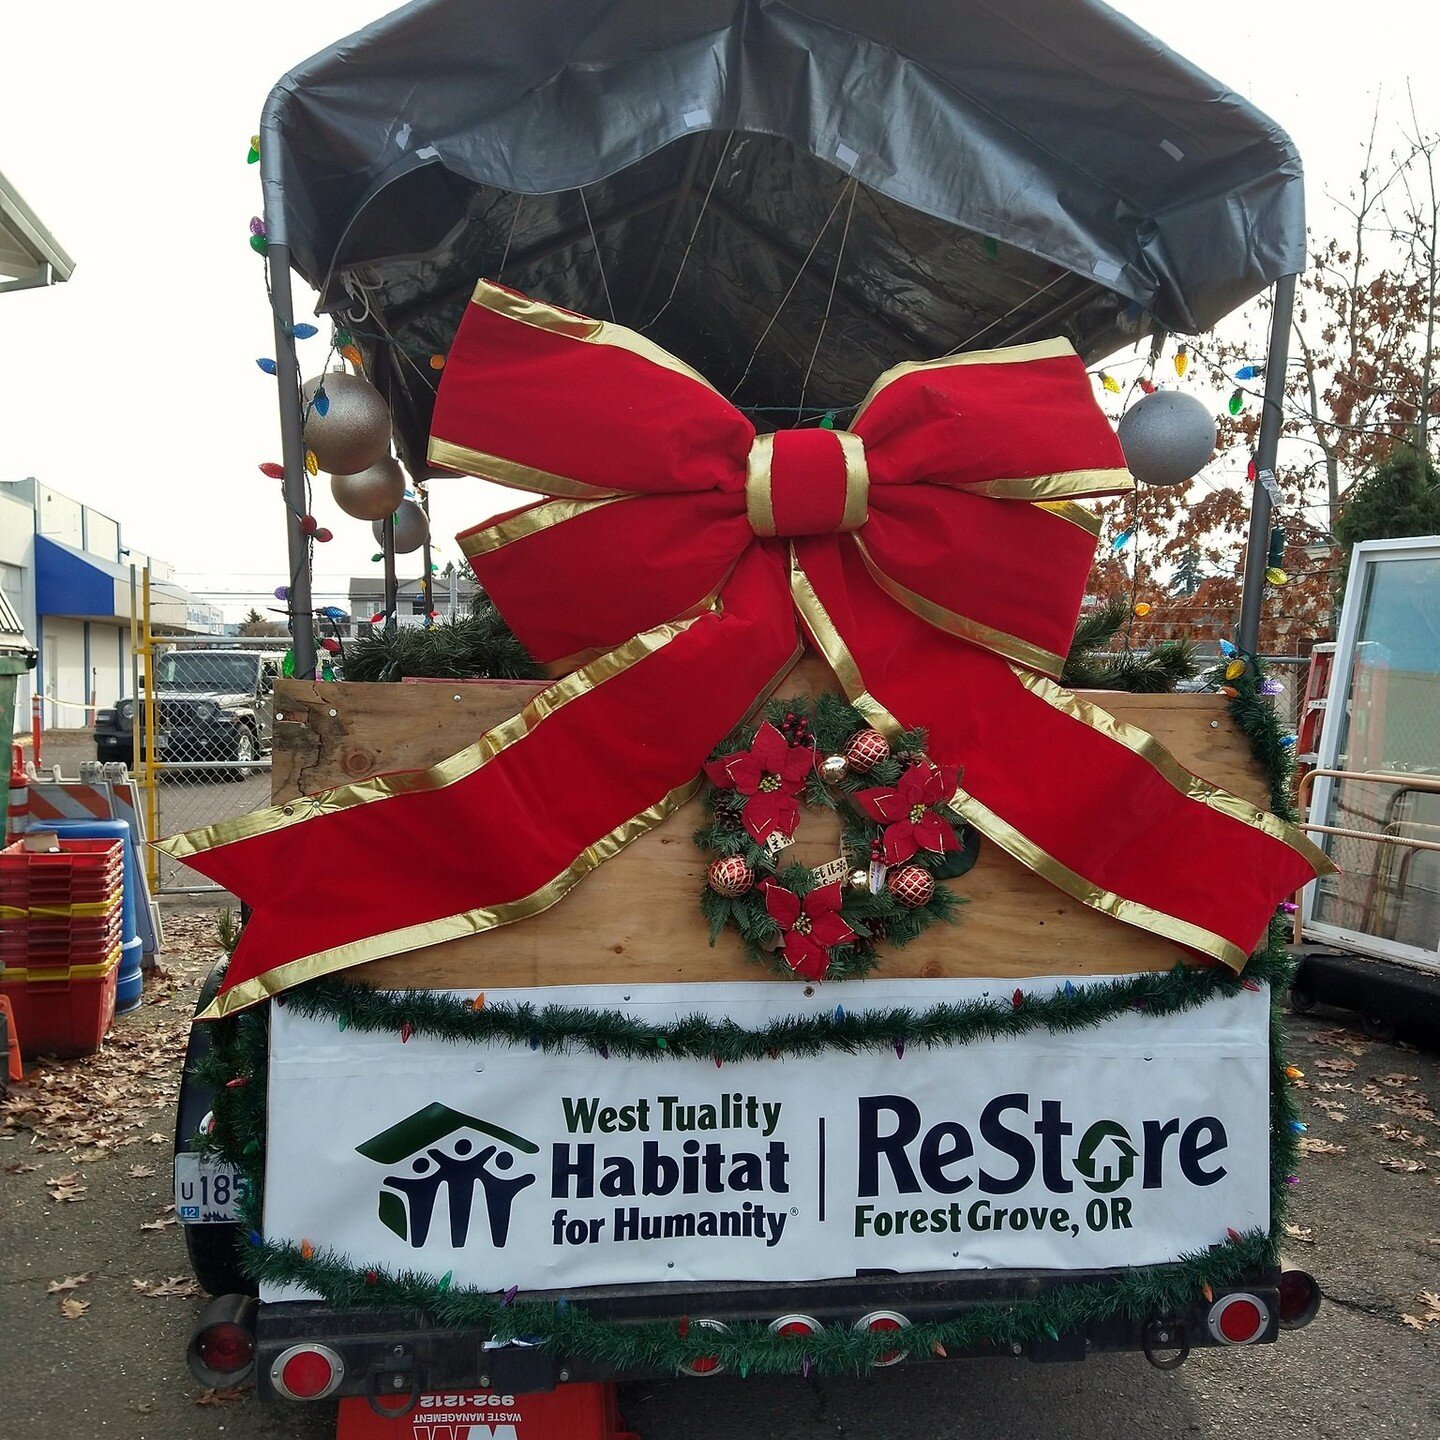 See our Christmas float tonight, all lit up, in the Forest Grove Holiday Light parade. Almost all decorations are from our ReStore! Thanks to the ReStore staff &amp; #volunteers for this lovely float. Enjoy the parade after our Christmas Concert at t